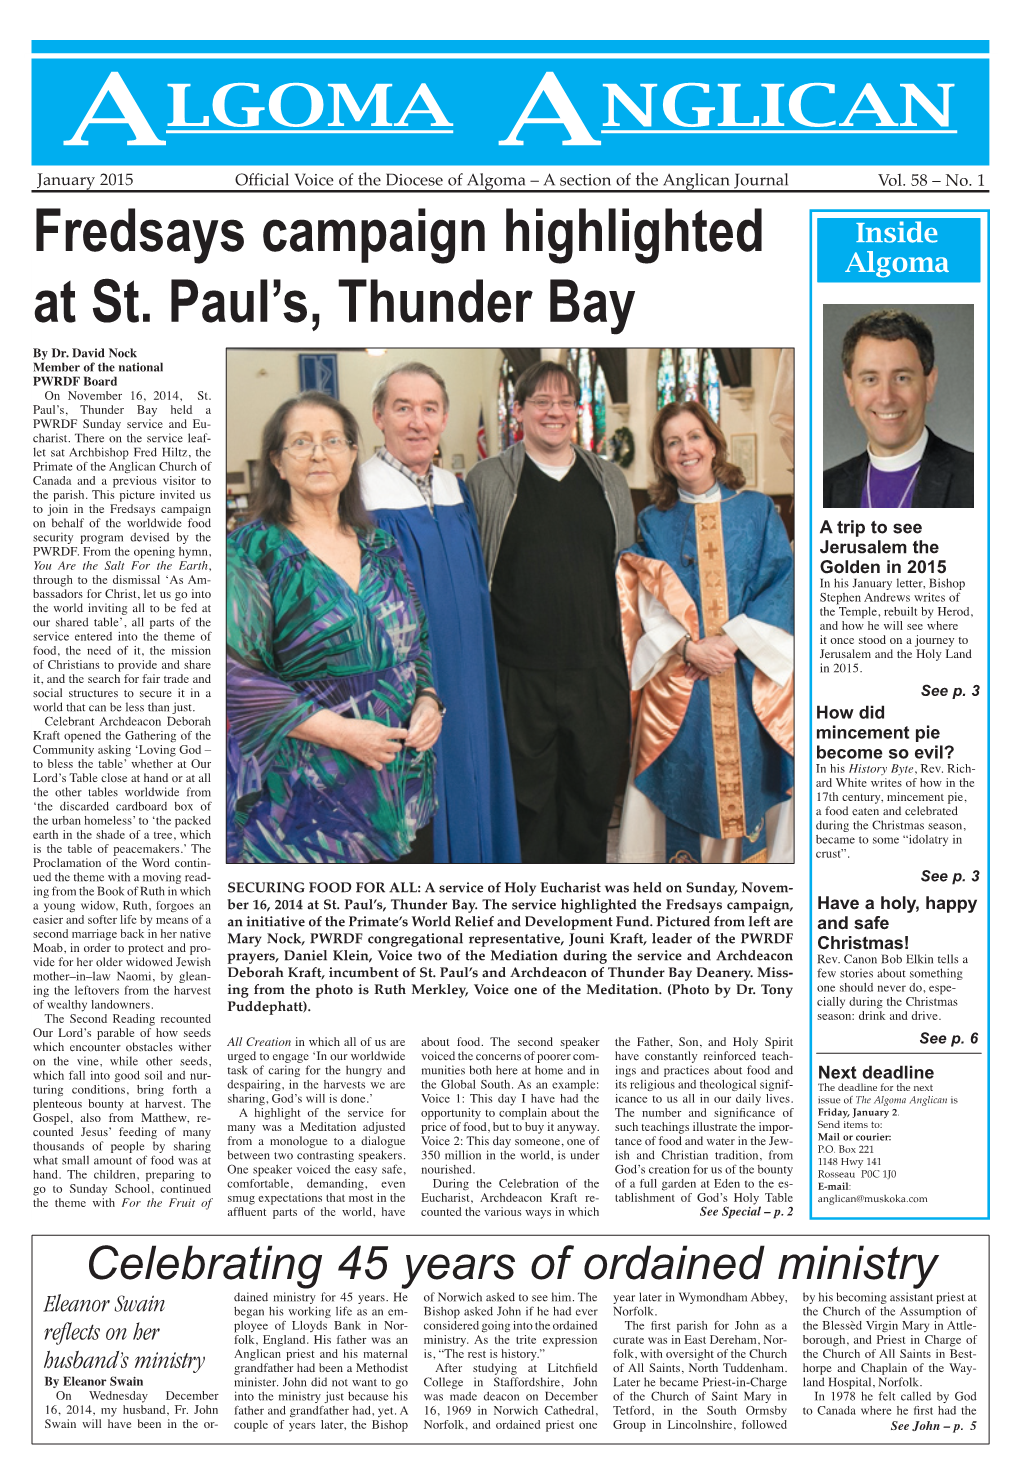 Fredsays Campaign Highlighted at St. Paul's, Thunder